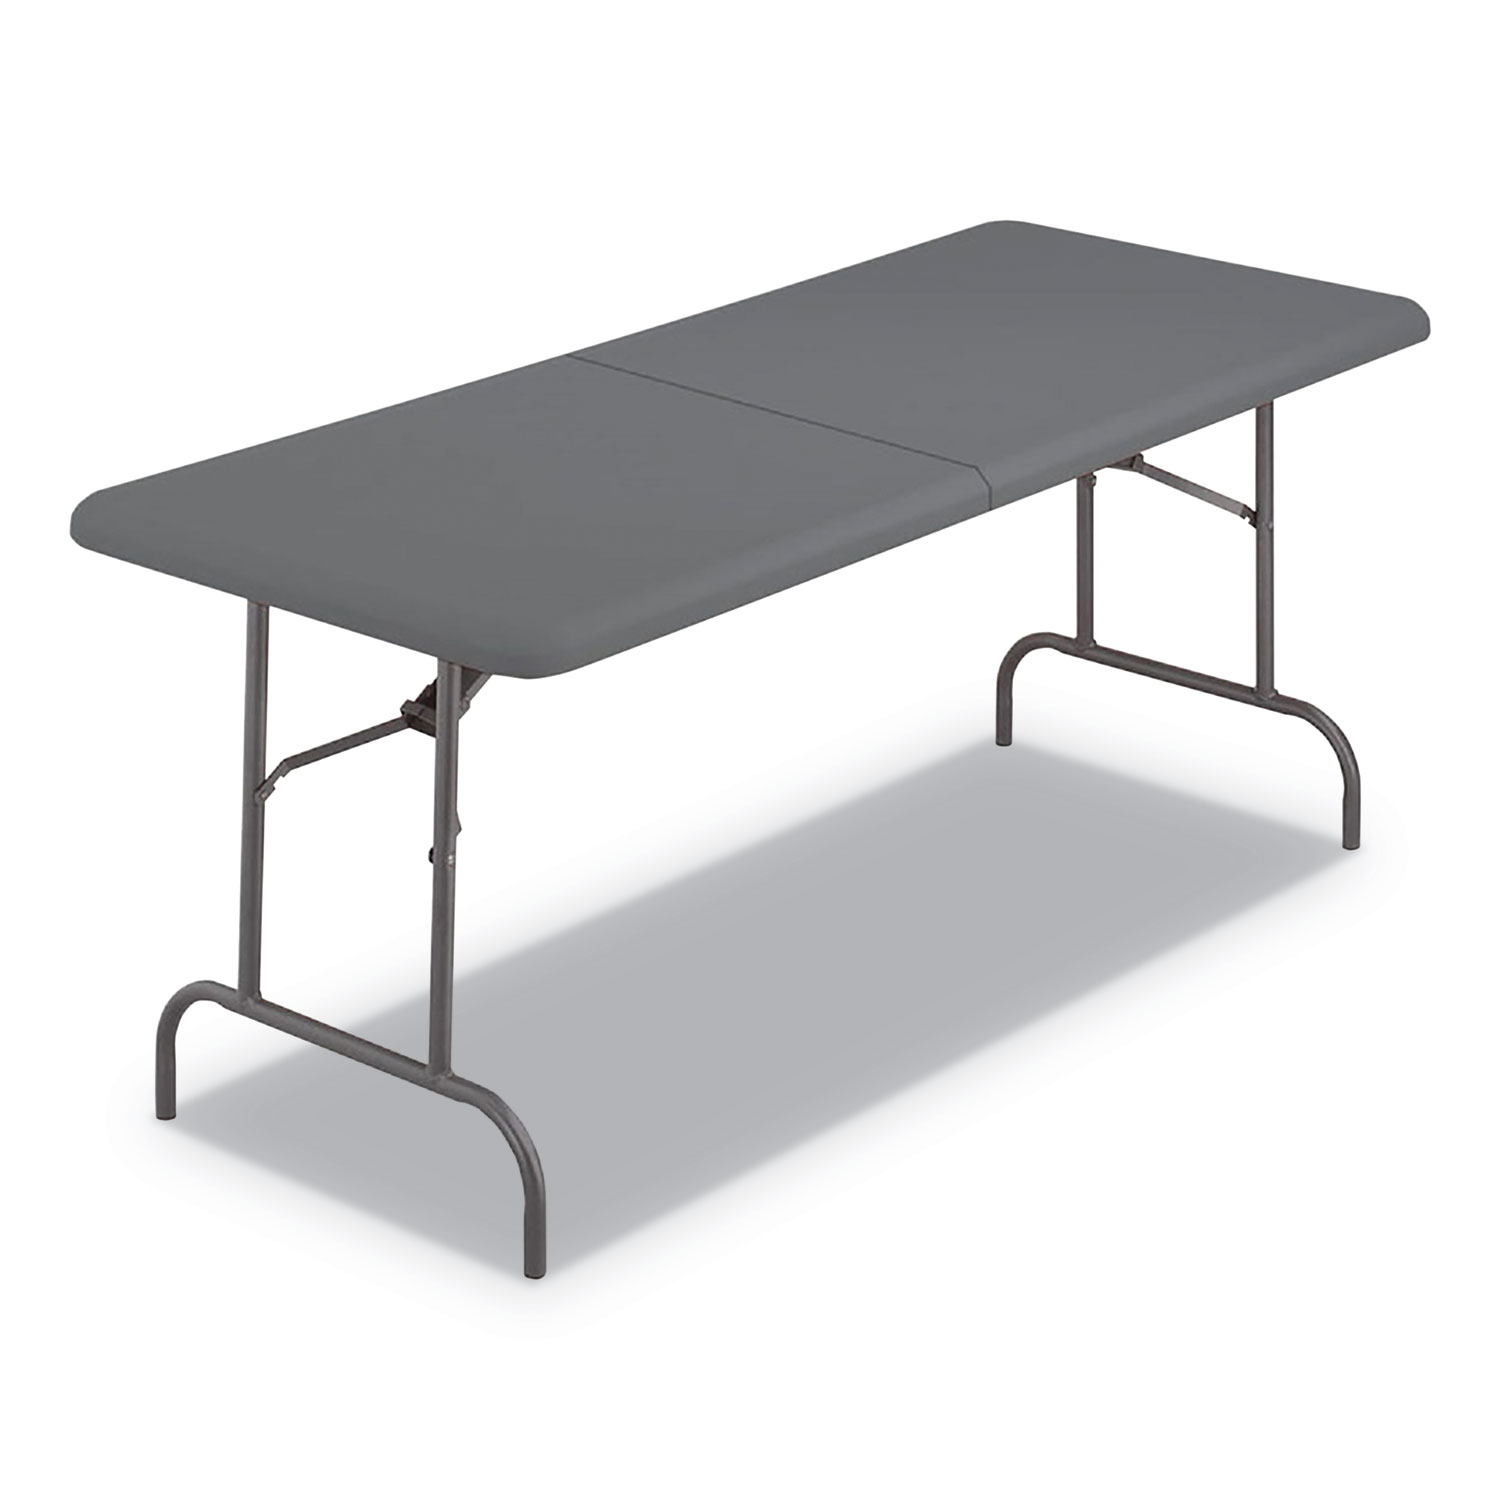  Iceberg 65467 IndestrucTables Too 1200 Series Folding Table, 30w x 72d x 29h, Charcoal (ICE65467) 